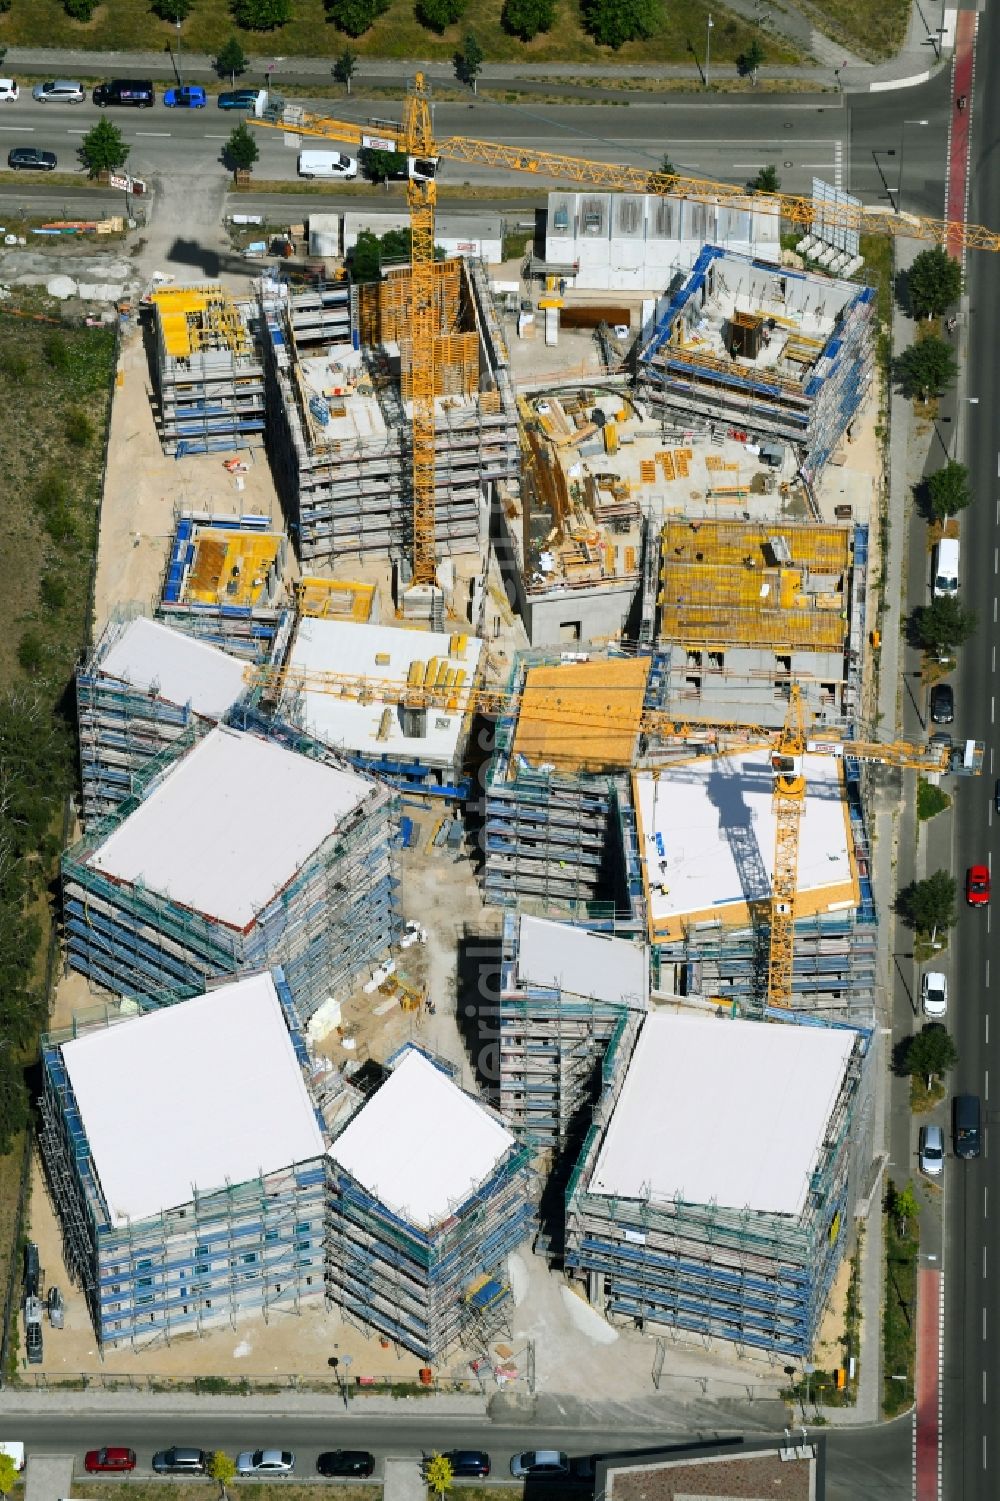 Berlin from above - Construction site to build a new multi-family residential complex Future Living Homes between Gross-Berliner Damm - Konrad-Zuse-Strasse and Hermann-Dorner-Allee in the district Adlershof - Johannisthal in Berlin, Germany